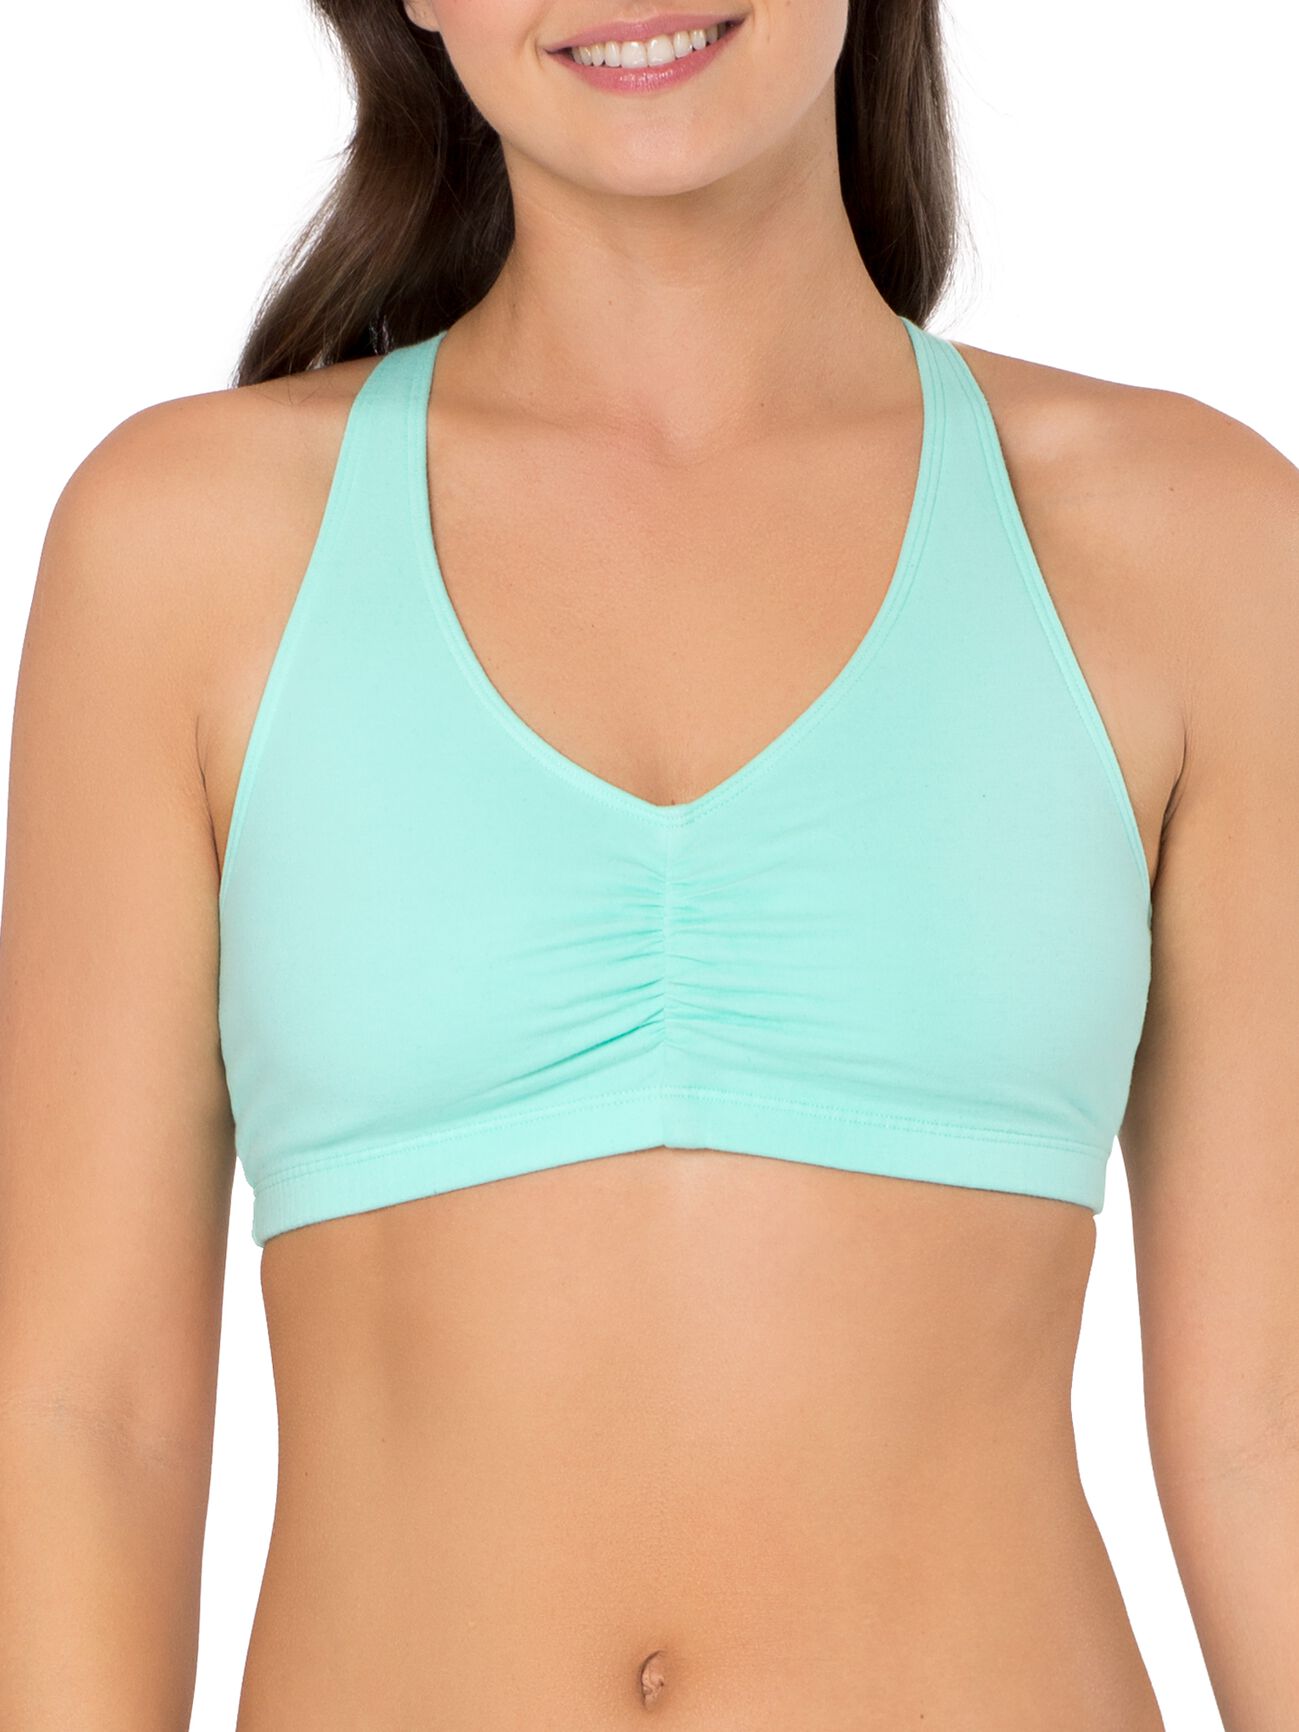 Fit for Me by Fruit of the Loom Women's Everyday T-Shirt Bra, Style